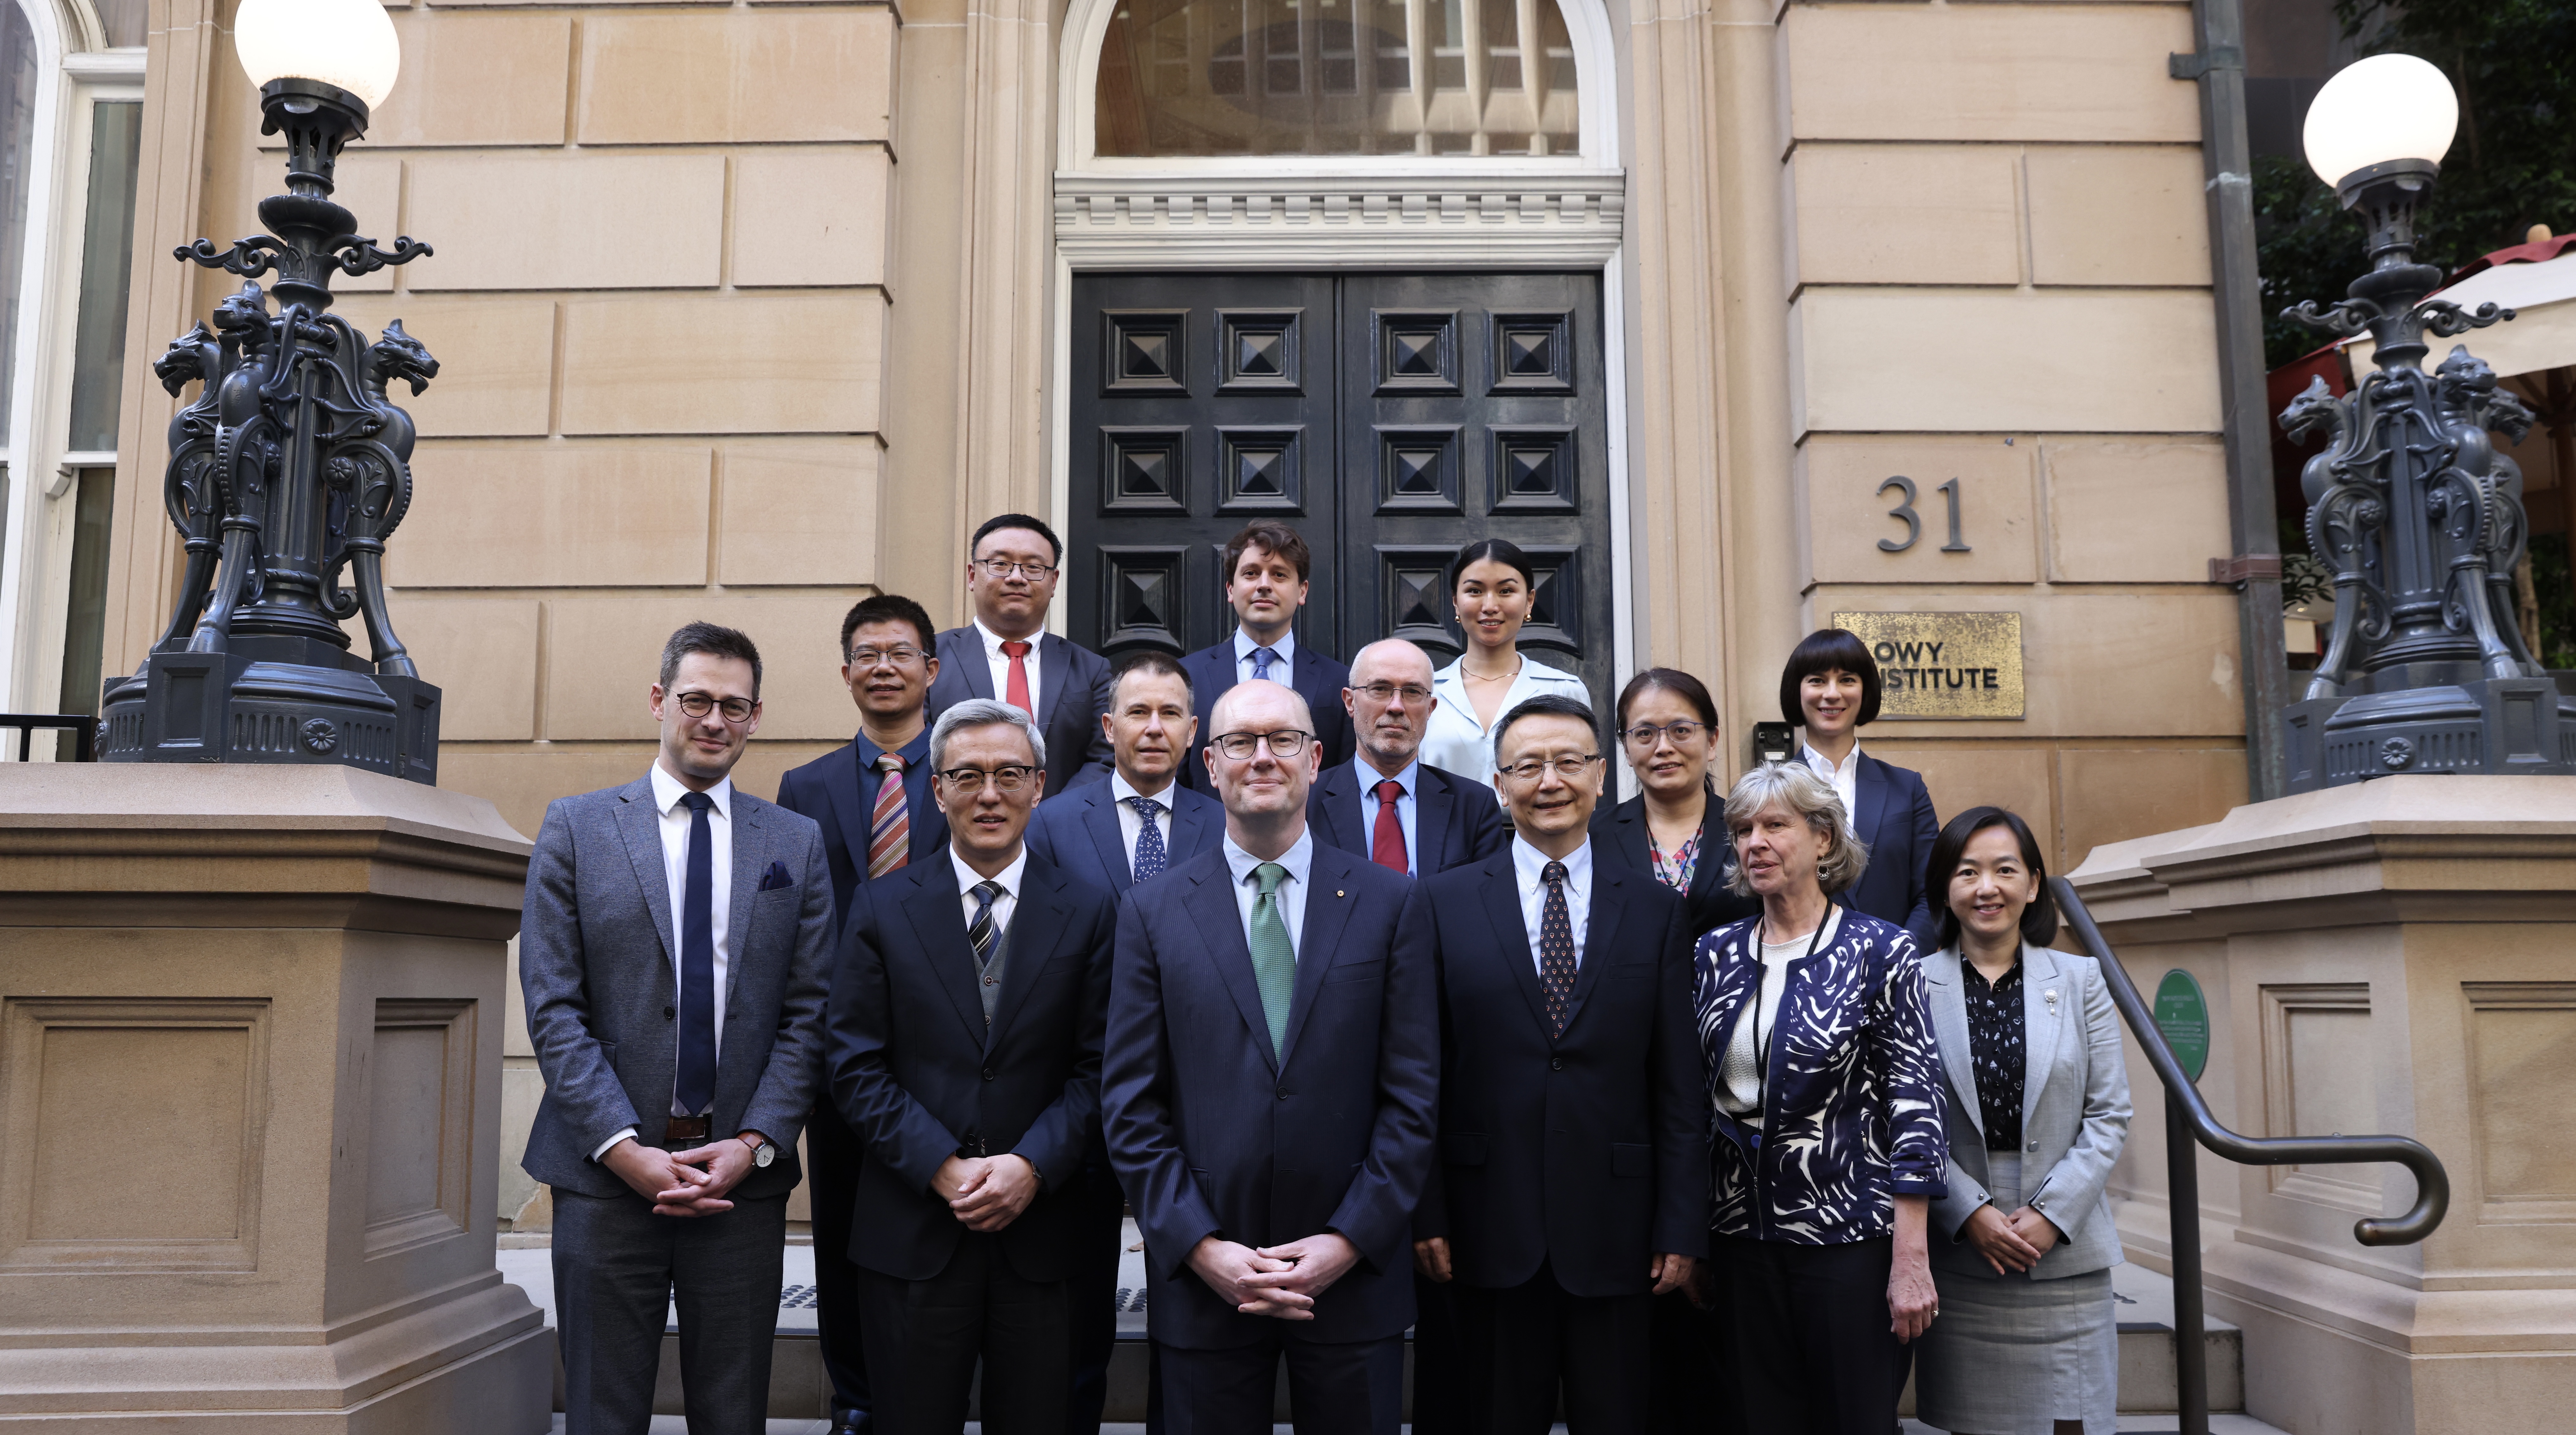 Members of delegations from the Lowy Institute and Shanghai Institutes for International Studies.